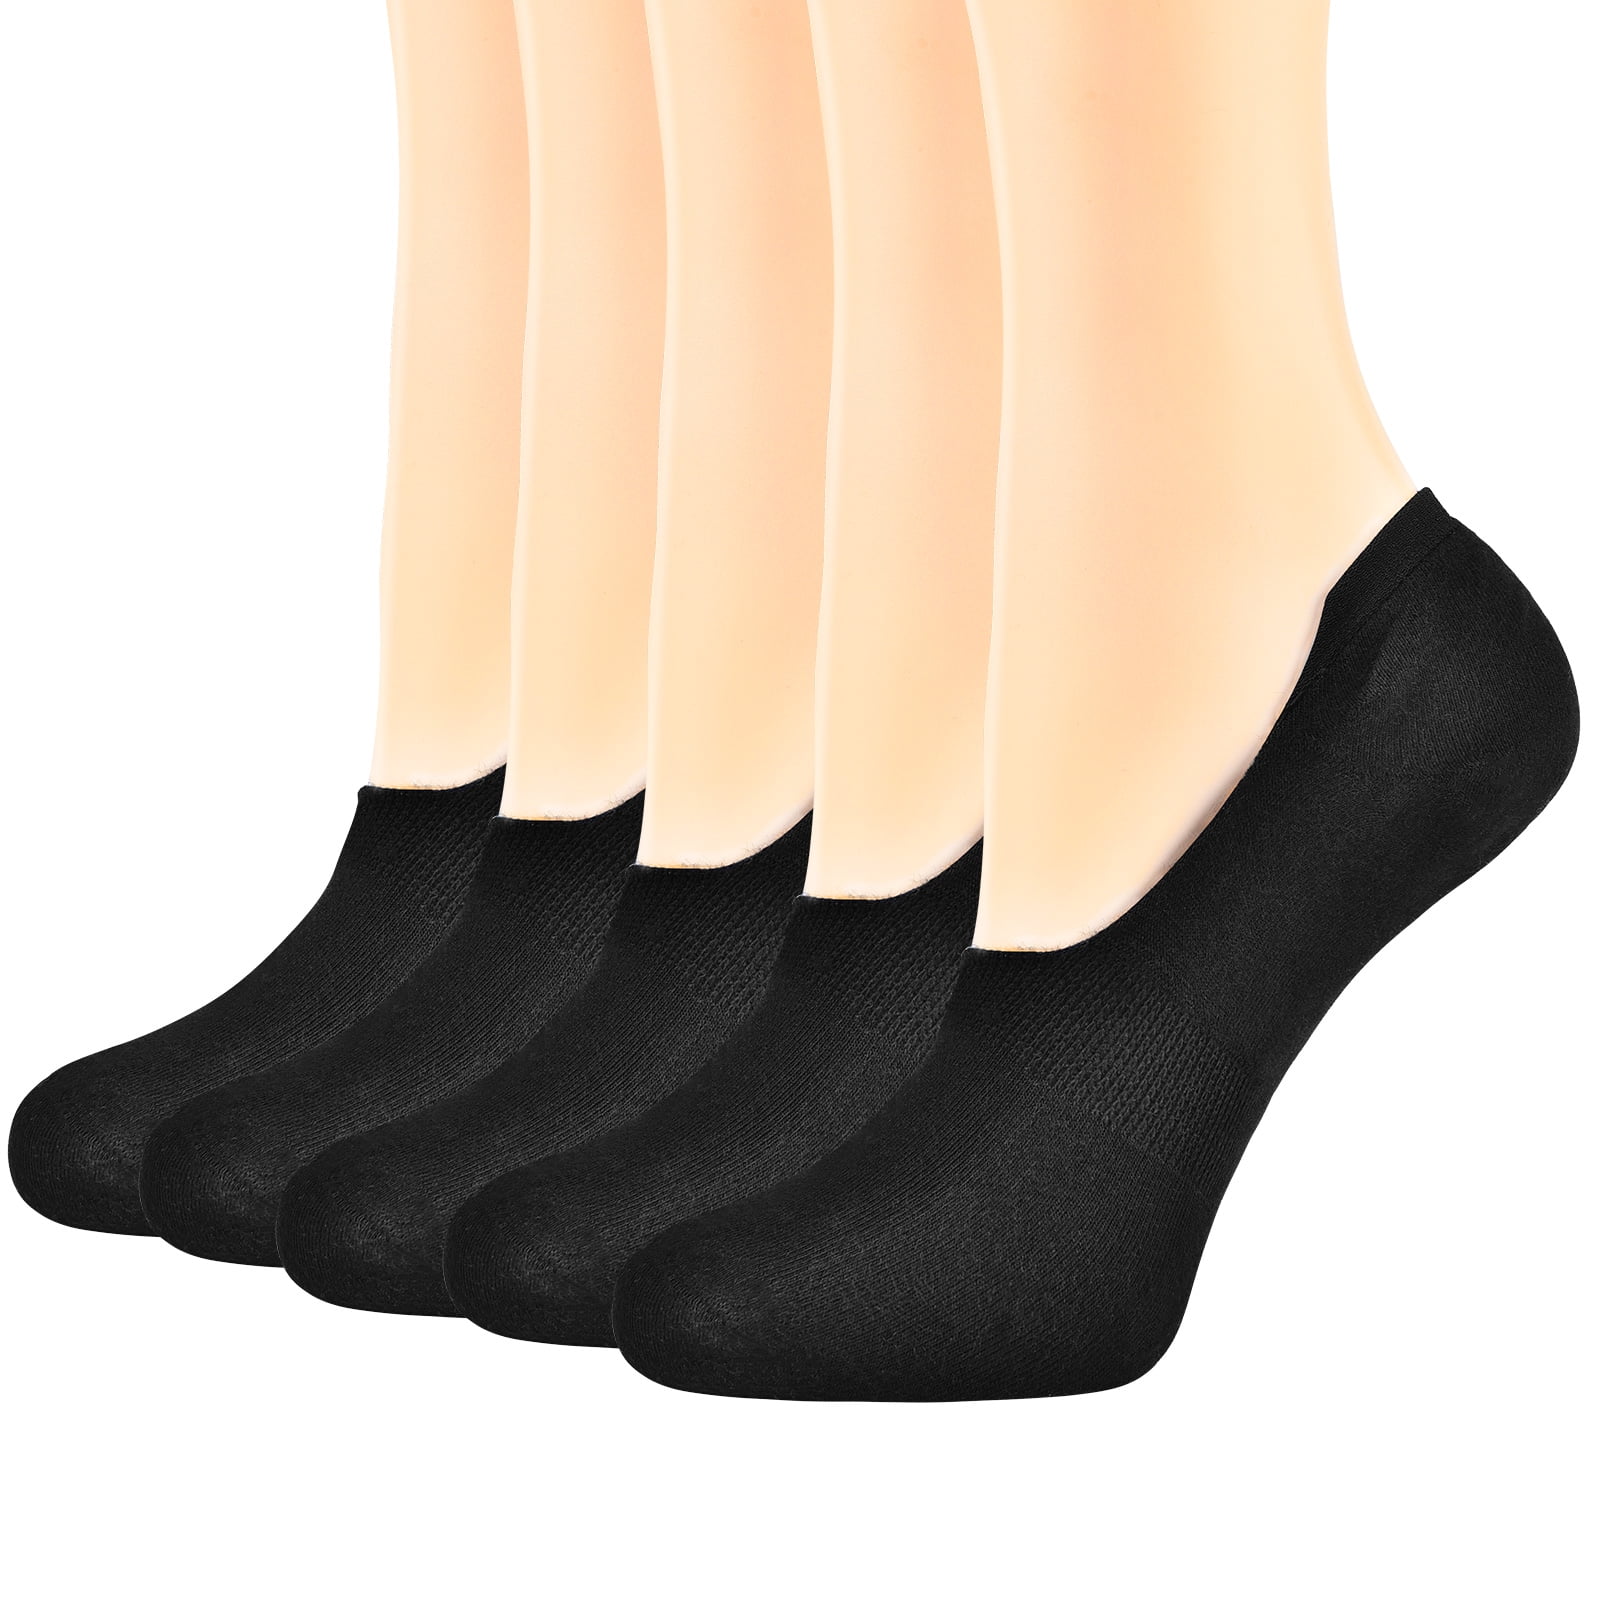 No Show Socks For Women Casual Low Cut Sock Liners With Non Slip Grips Womens Cotton Invisible Socks